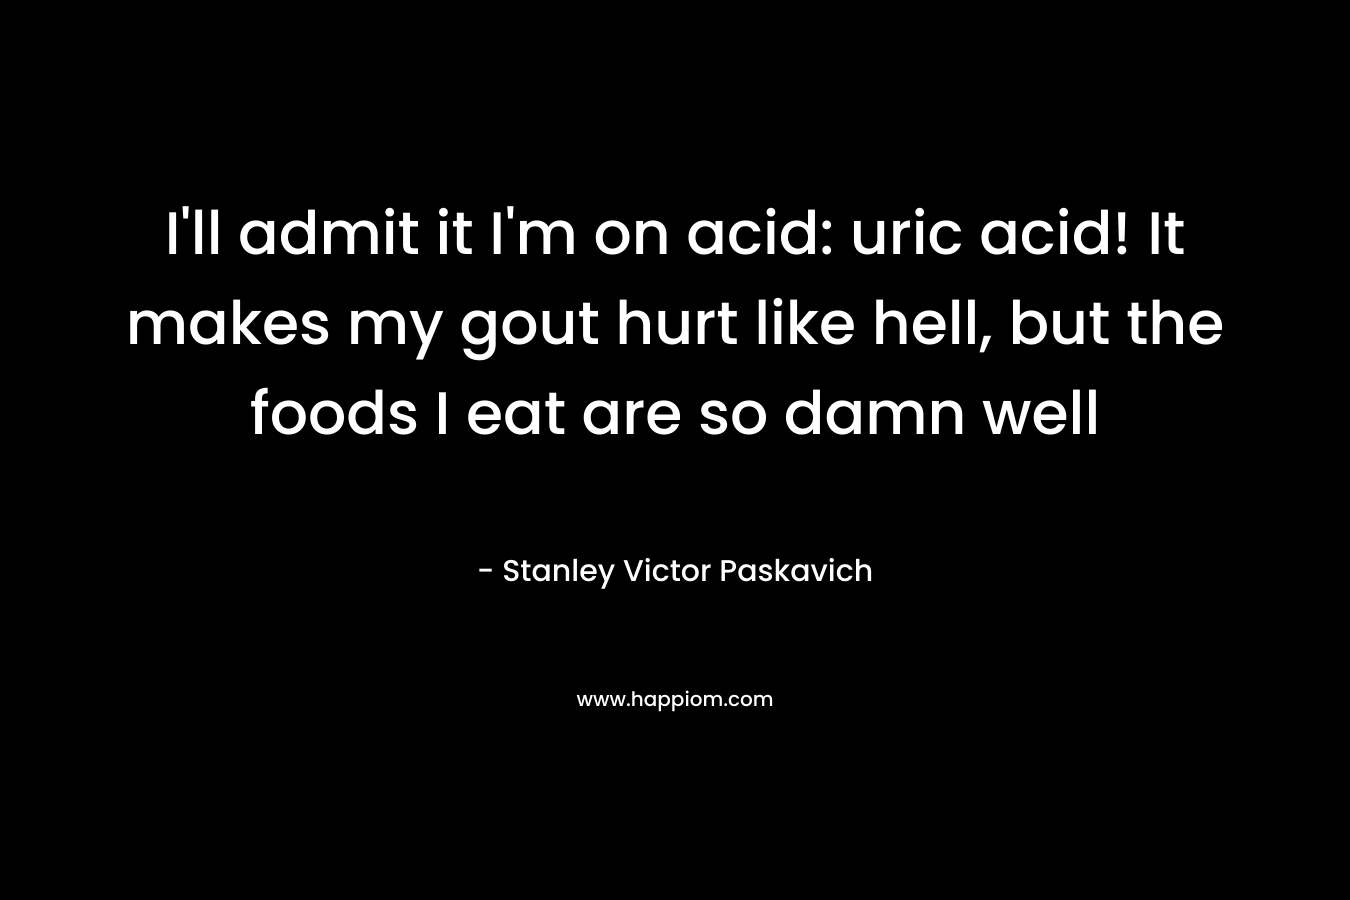 I'll admit it I'm on acid: uric acid! It makes my gout hurt like hell, but the foods I eat are so damn well